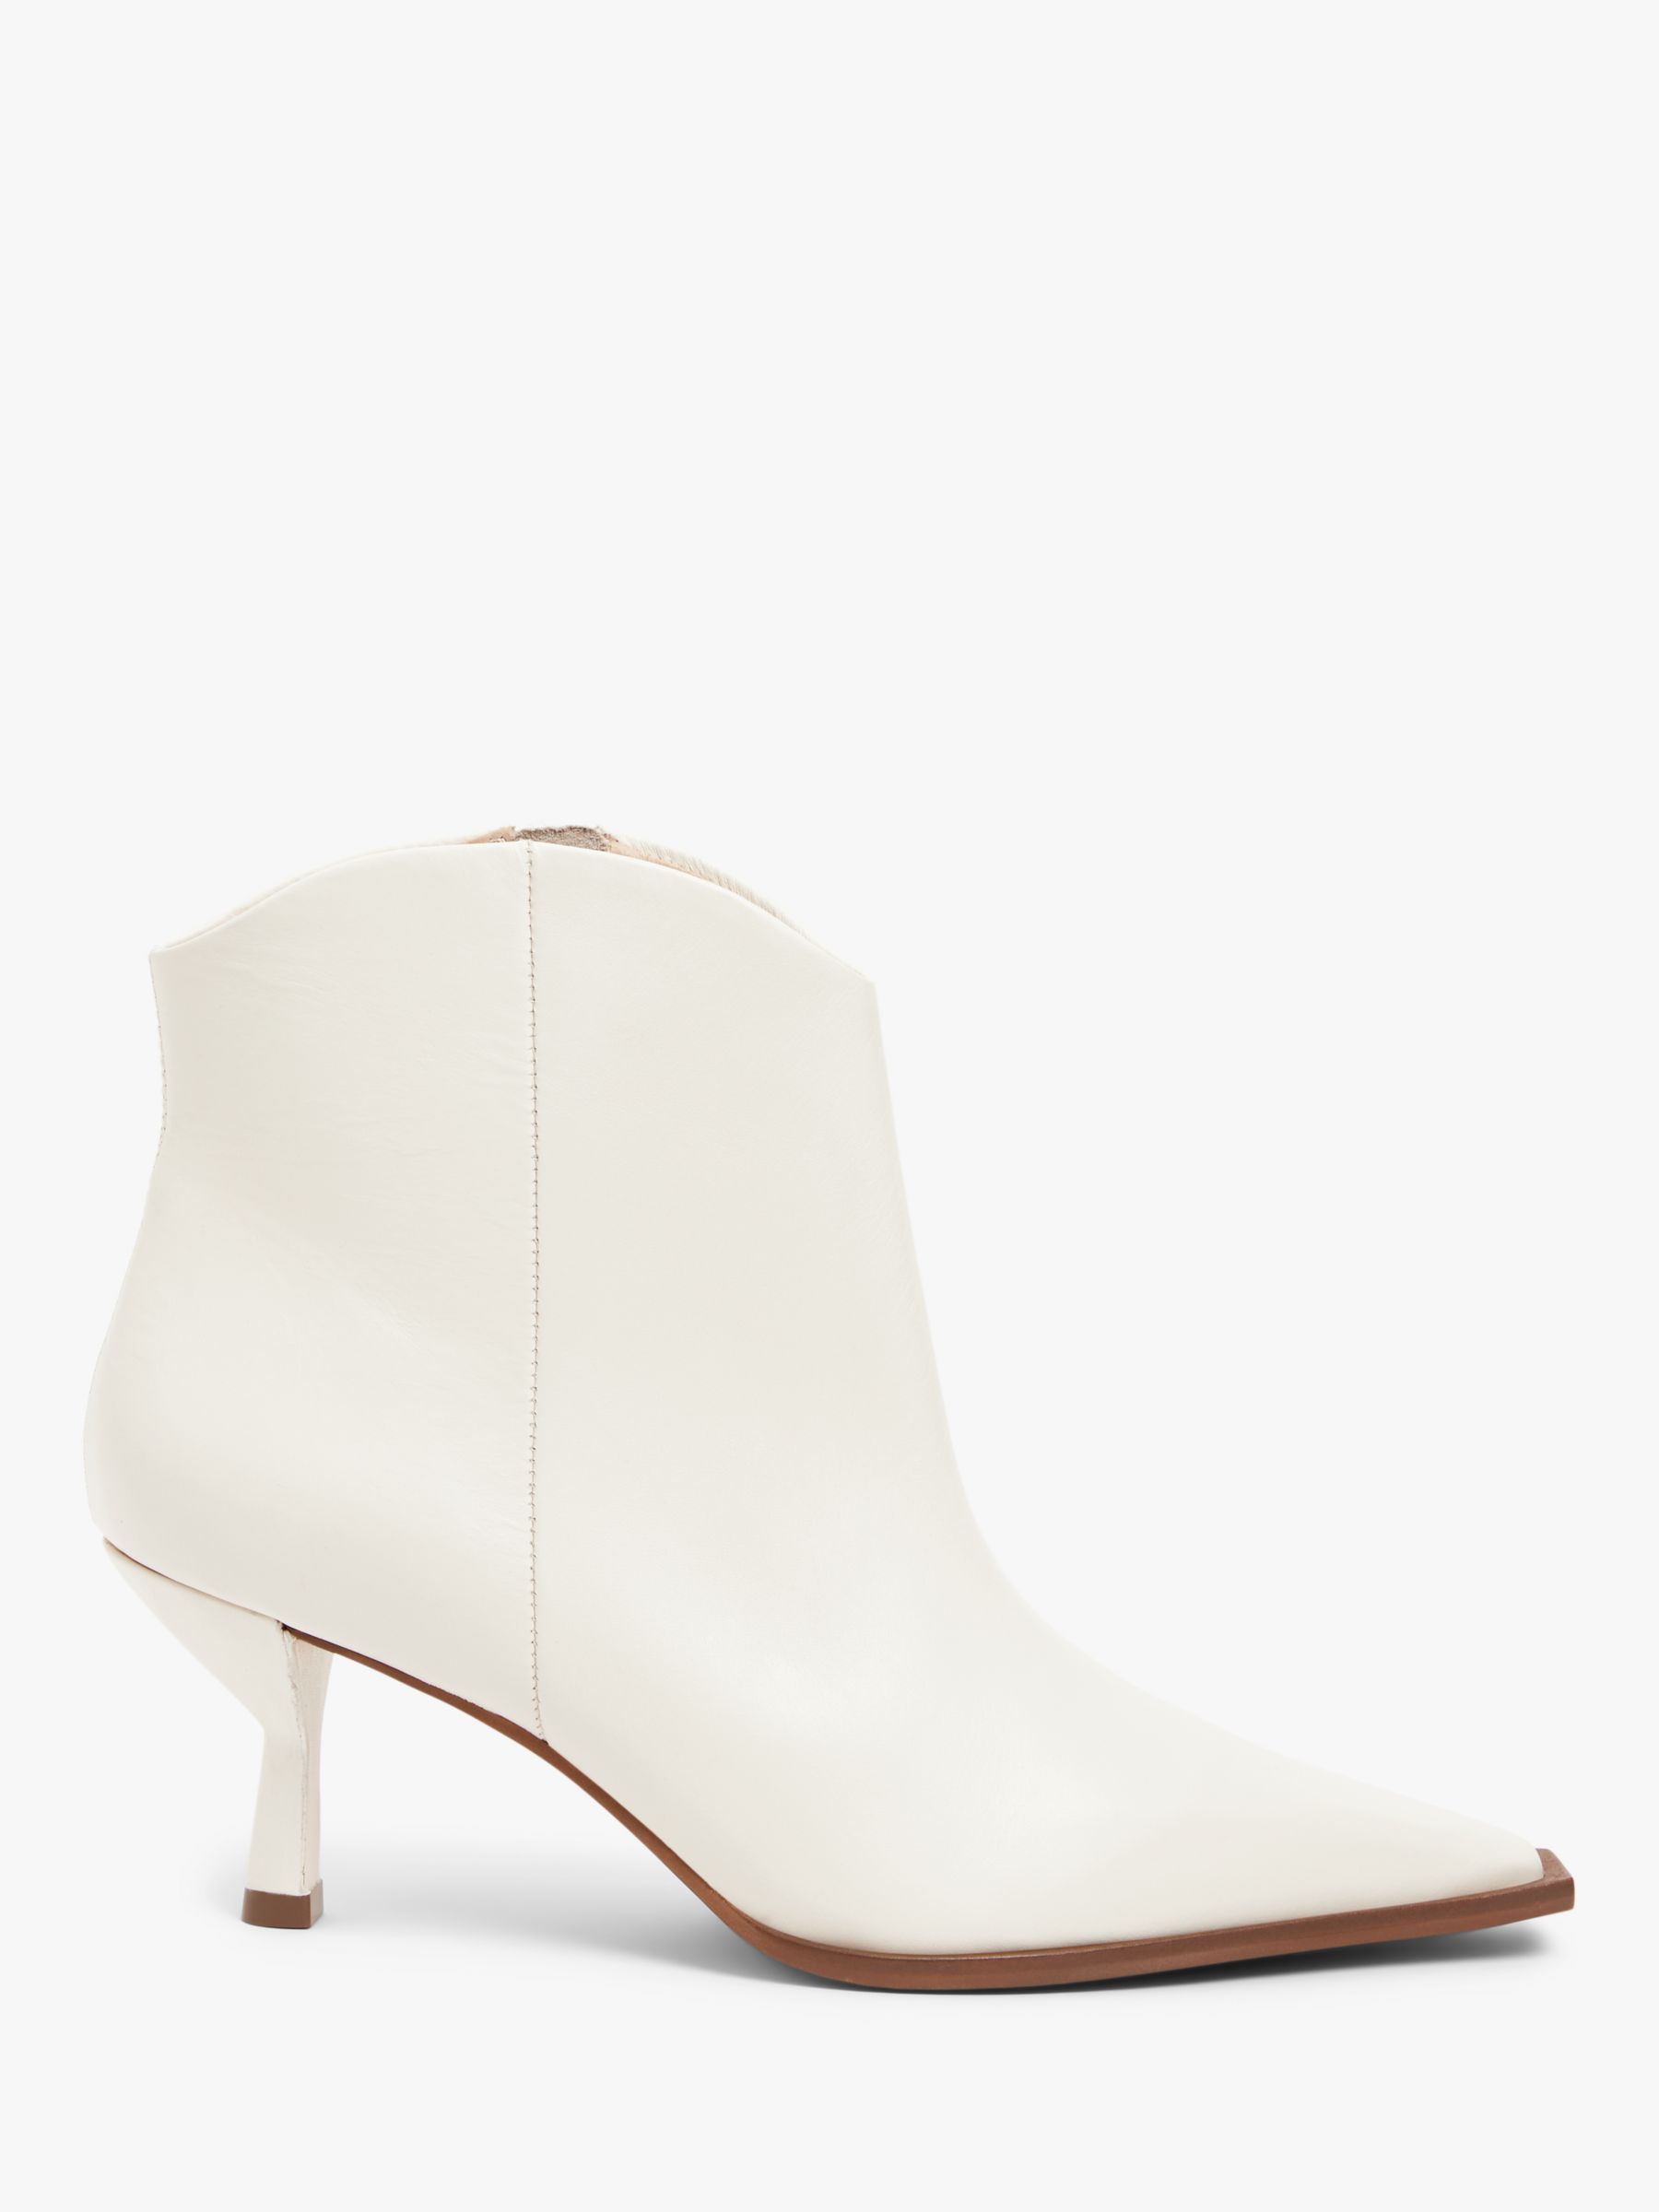 John Lewis Panama Leather Dressy Western Ankle Boots, Off White at John ...